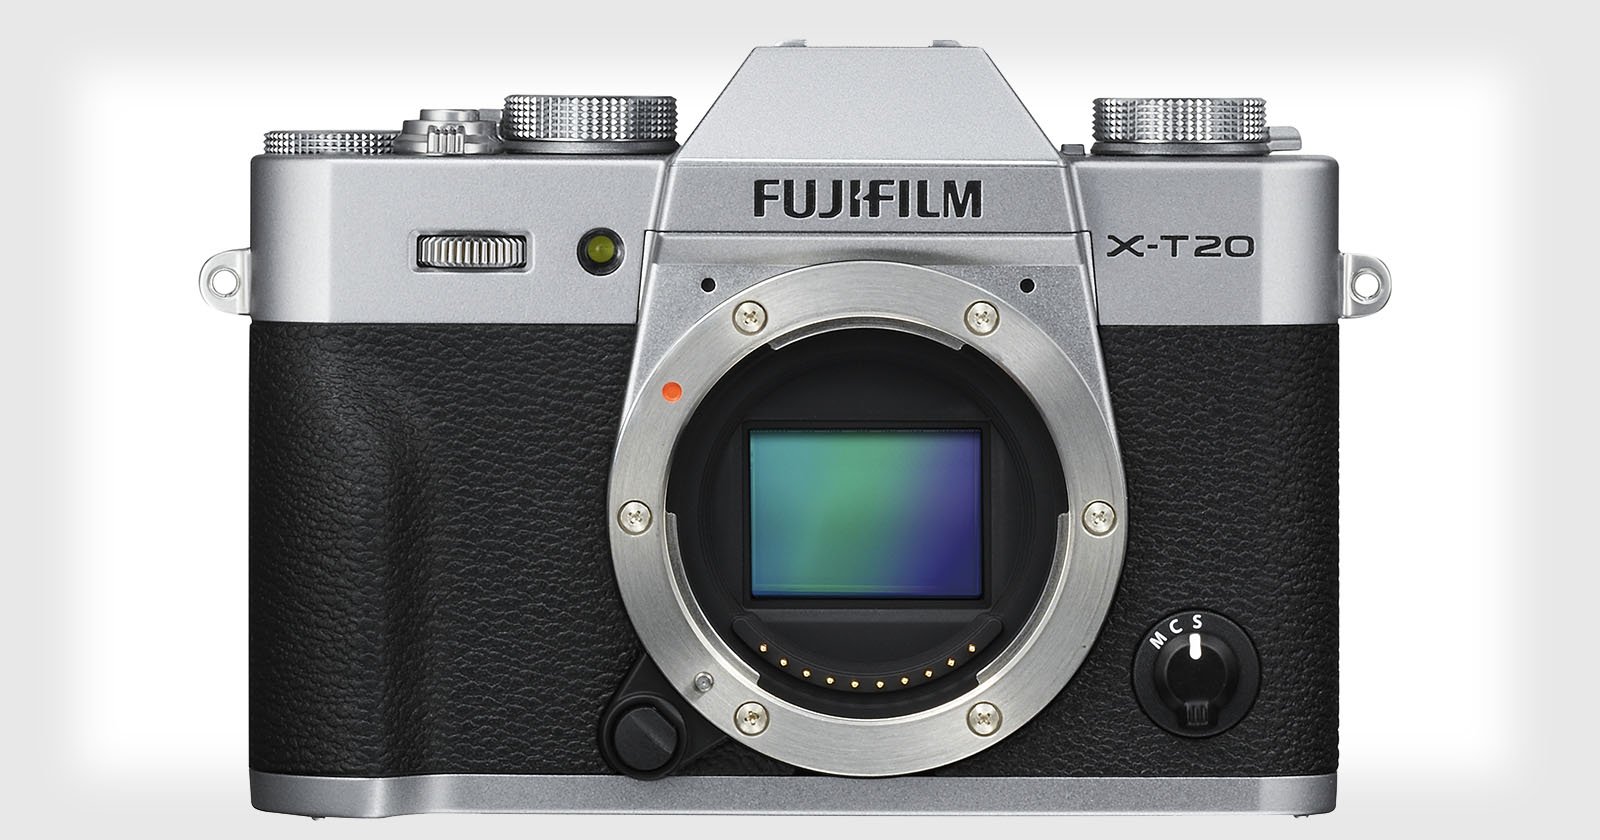 Fujifilm X-T20 Unveiled: 24MP Sensor, 91AF Points, and 4K Video